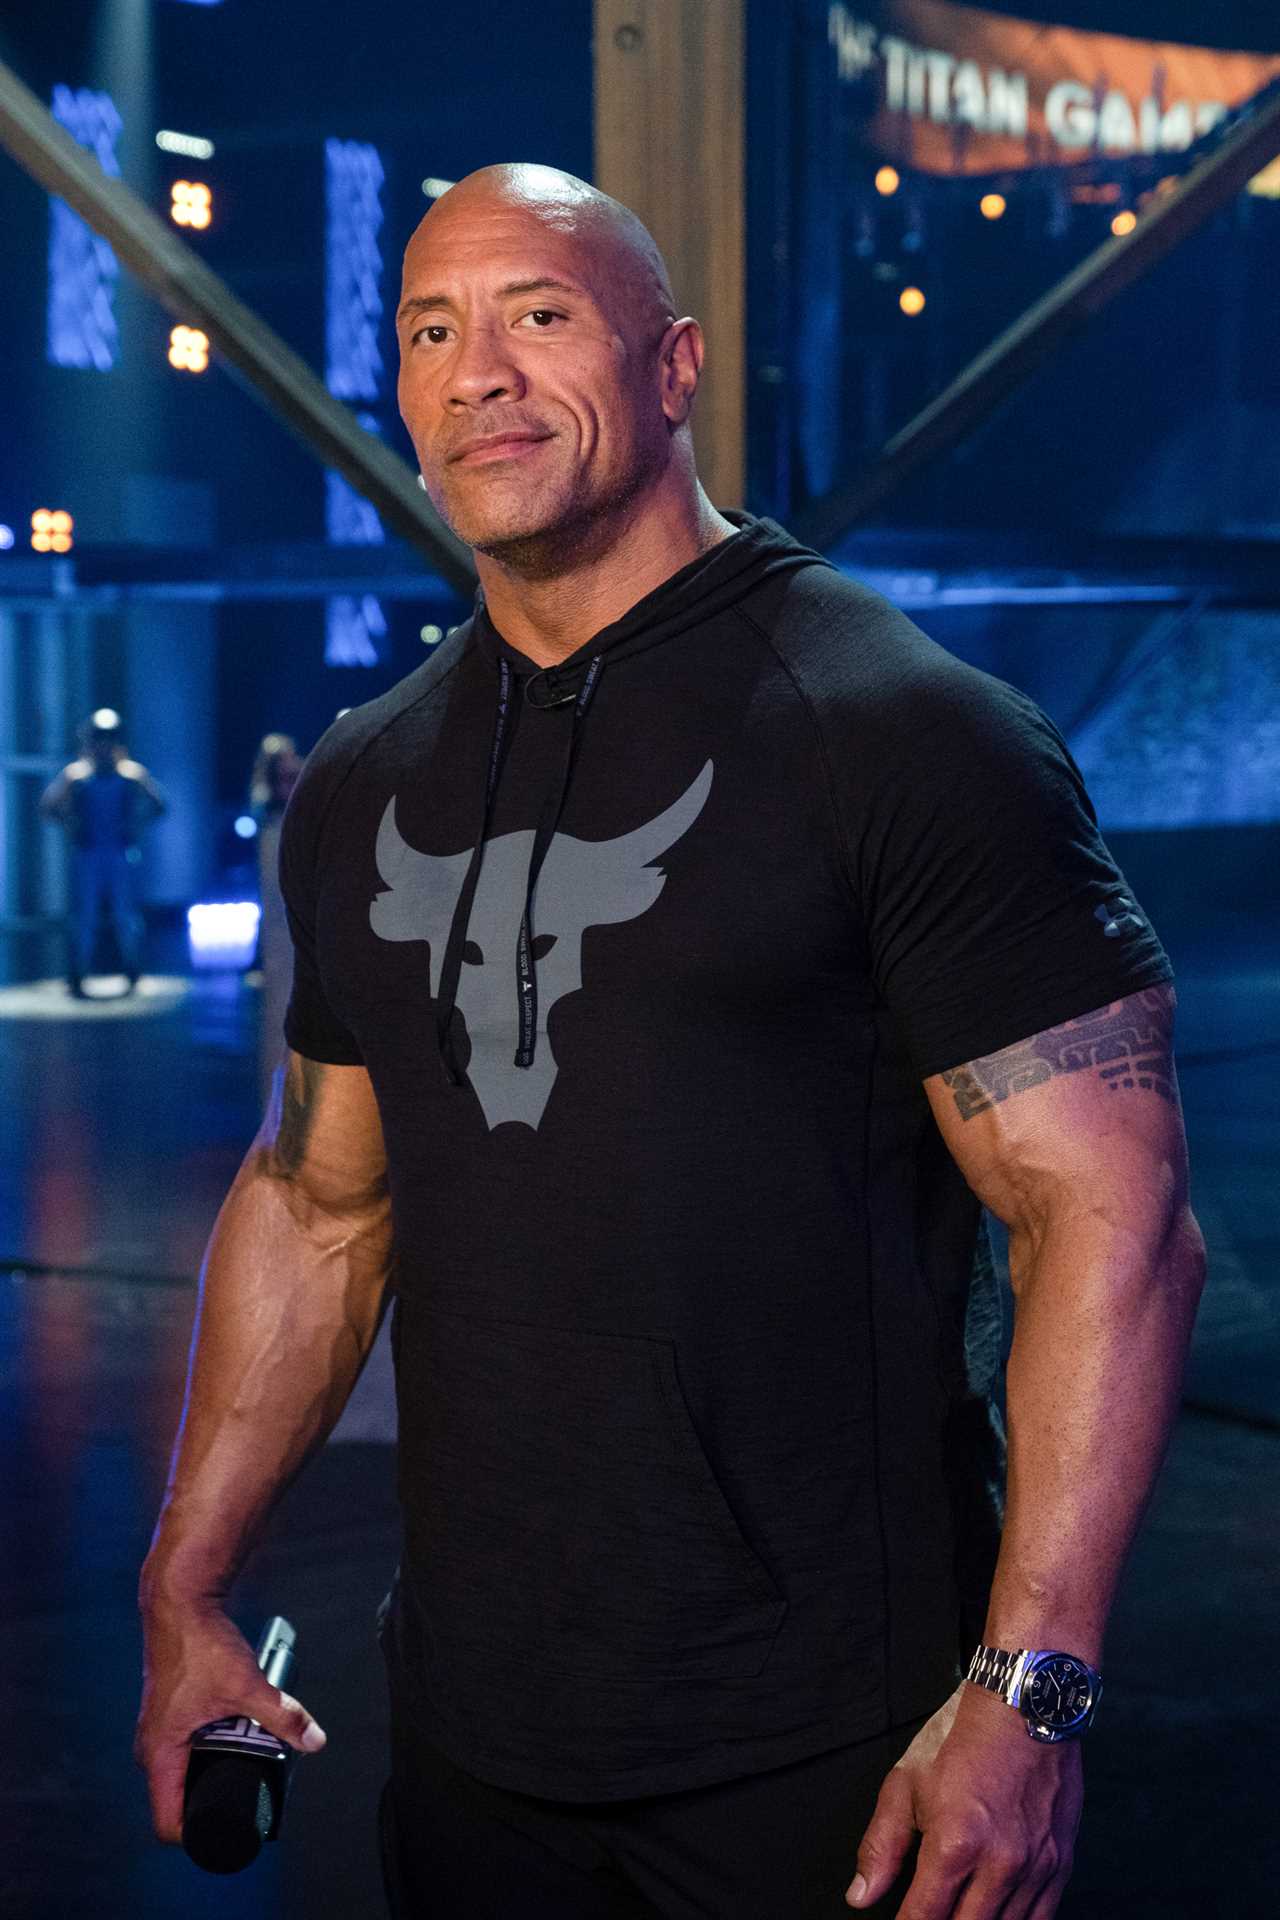 Dwayne Johnson set to star in new video game movie – with fans hoping it’s Fortnite